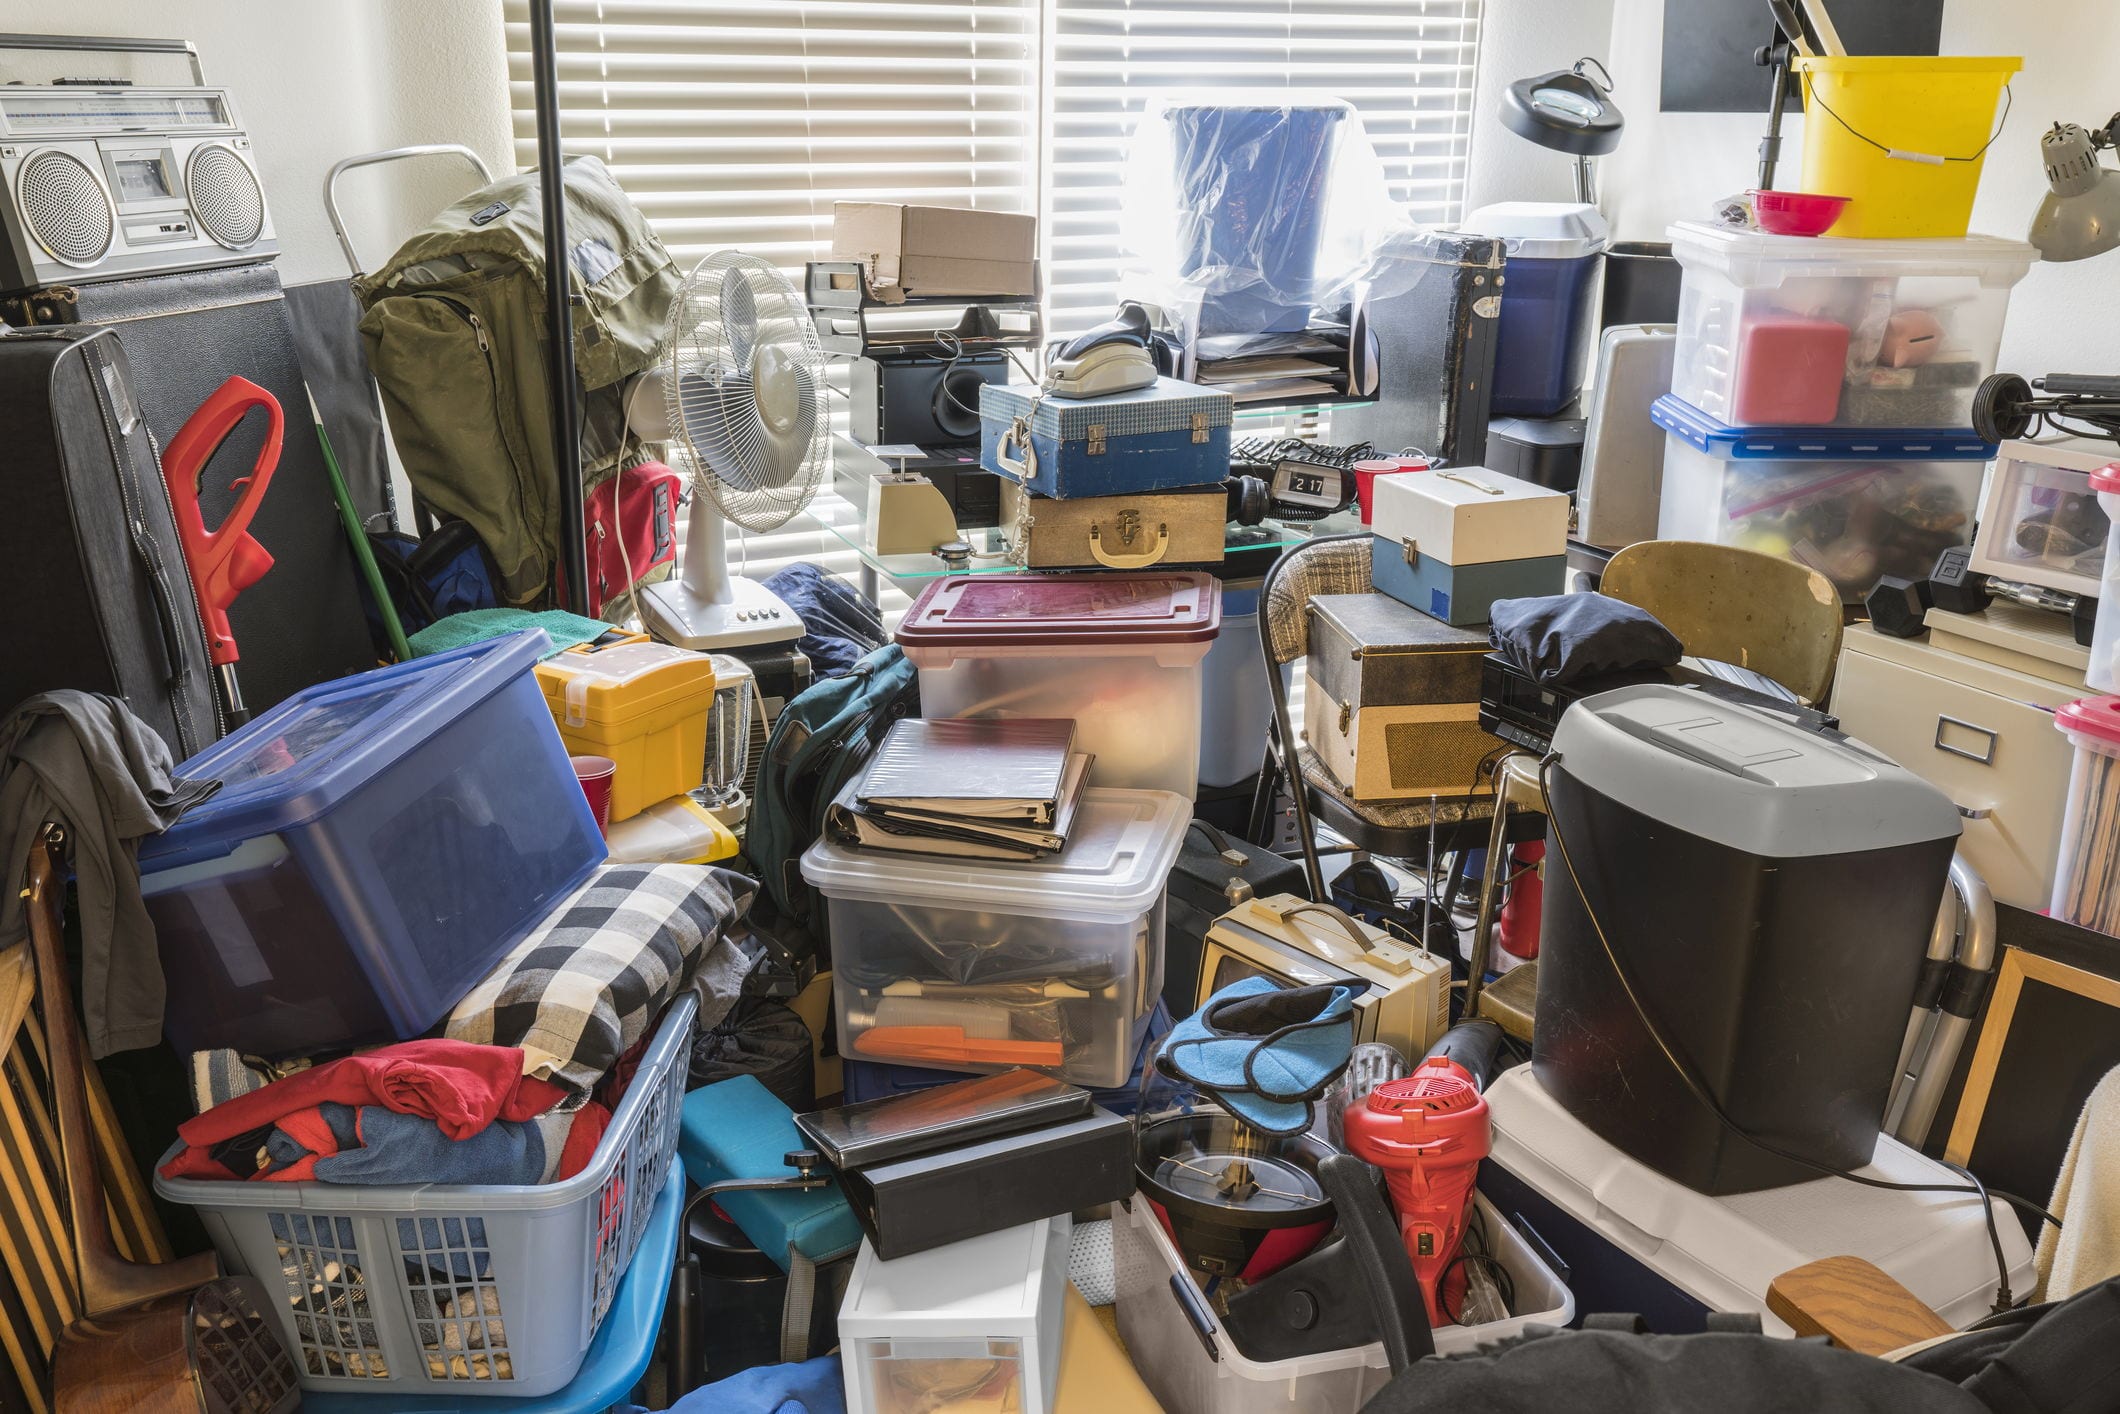 Questions You Should Ask when hiring a Junk Removal Service